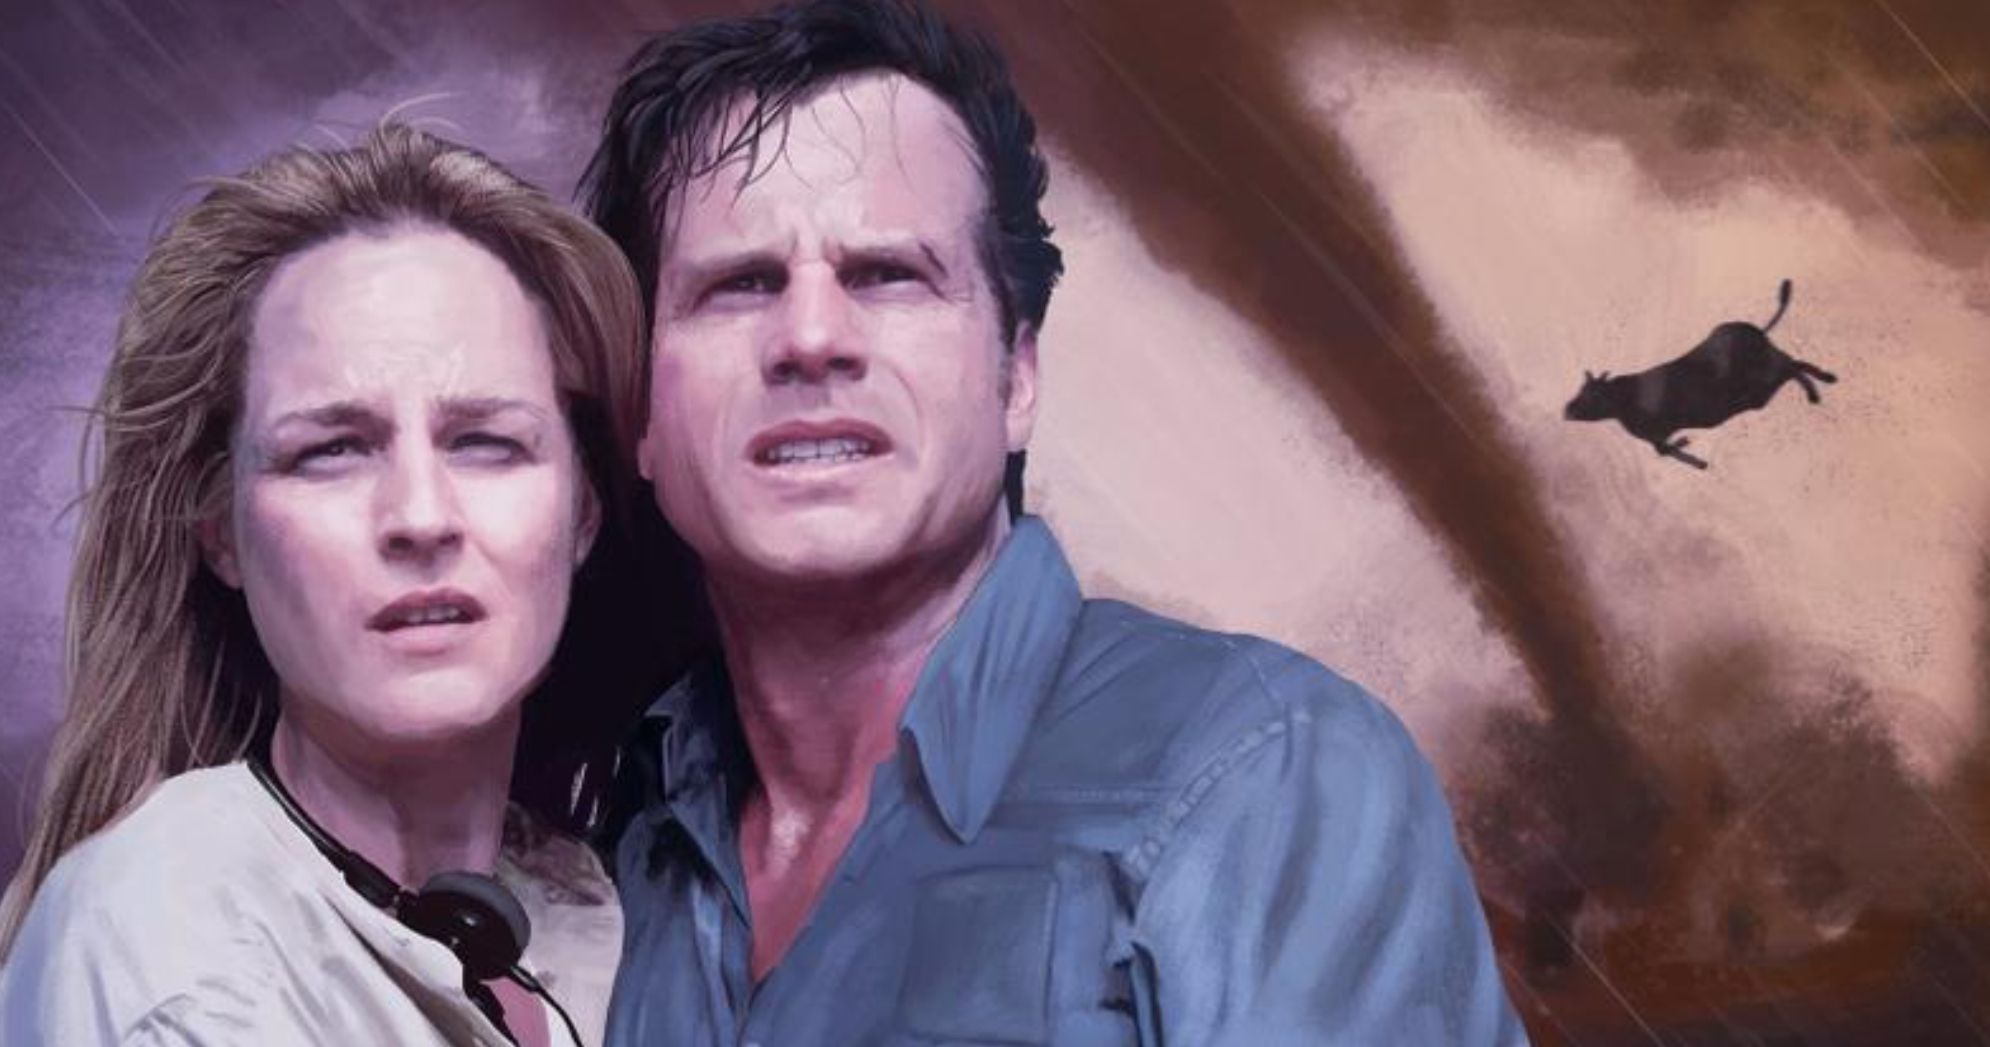 Twister 2 with Diverse Cast of Storm Chasers Rejected by Studio Says Helen Hunt